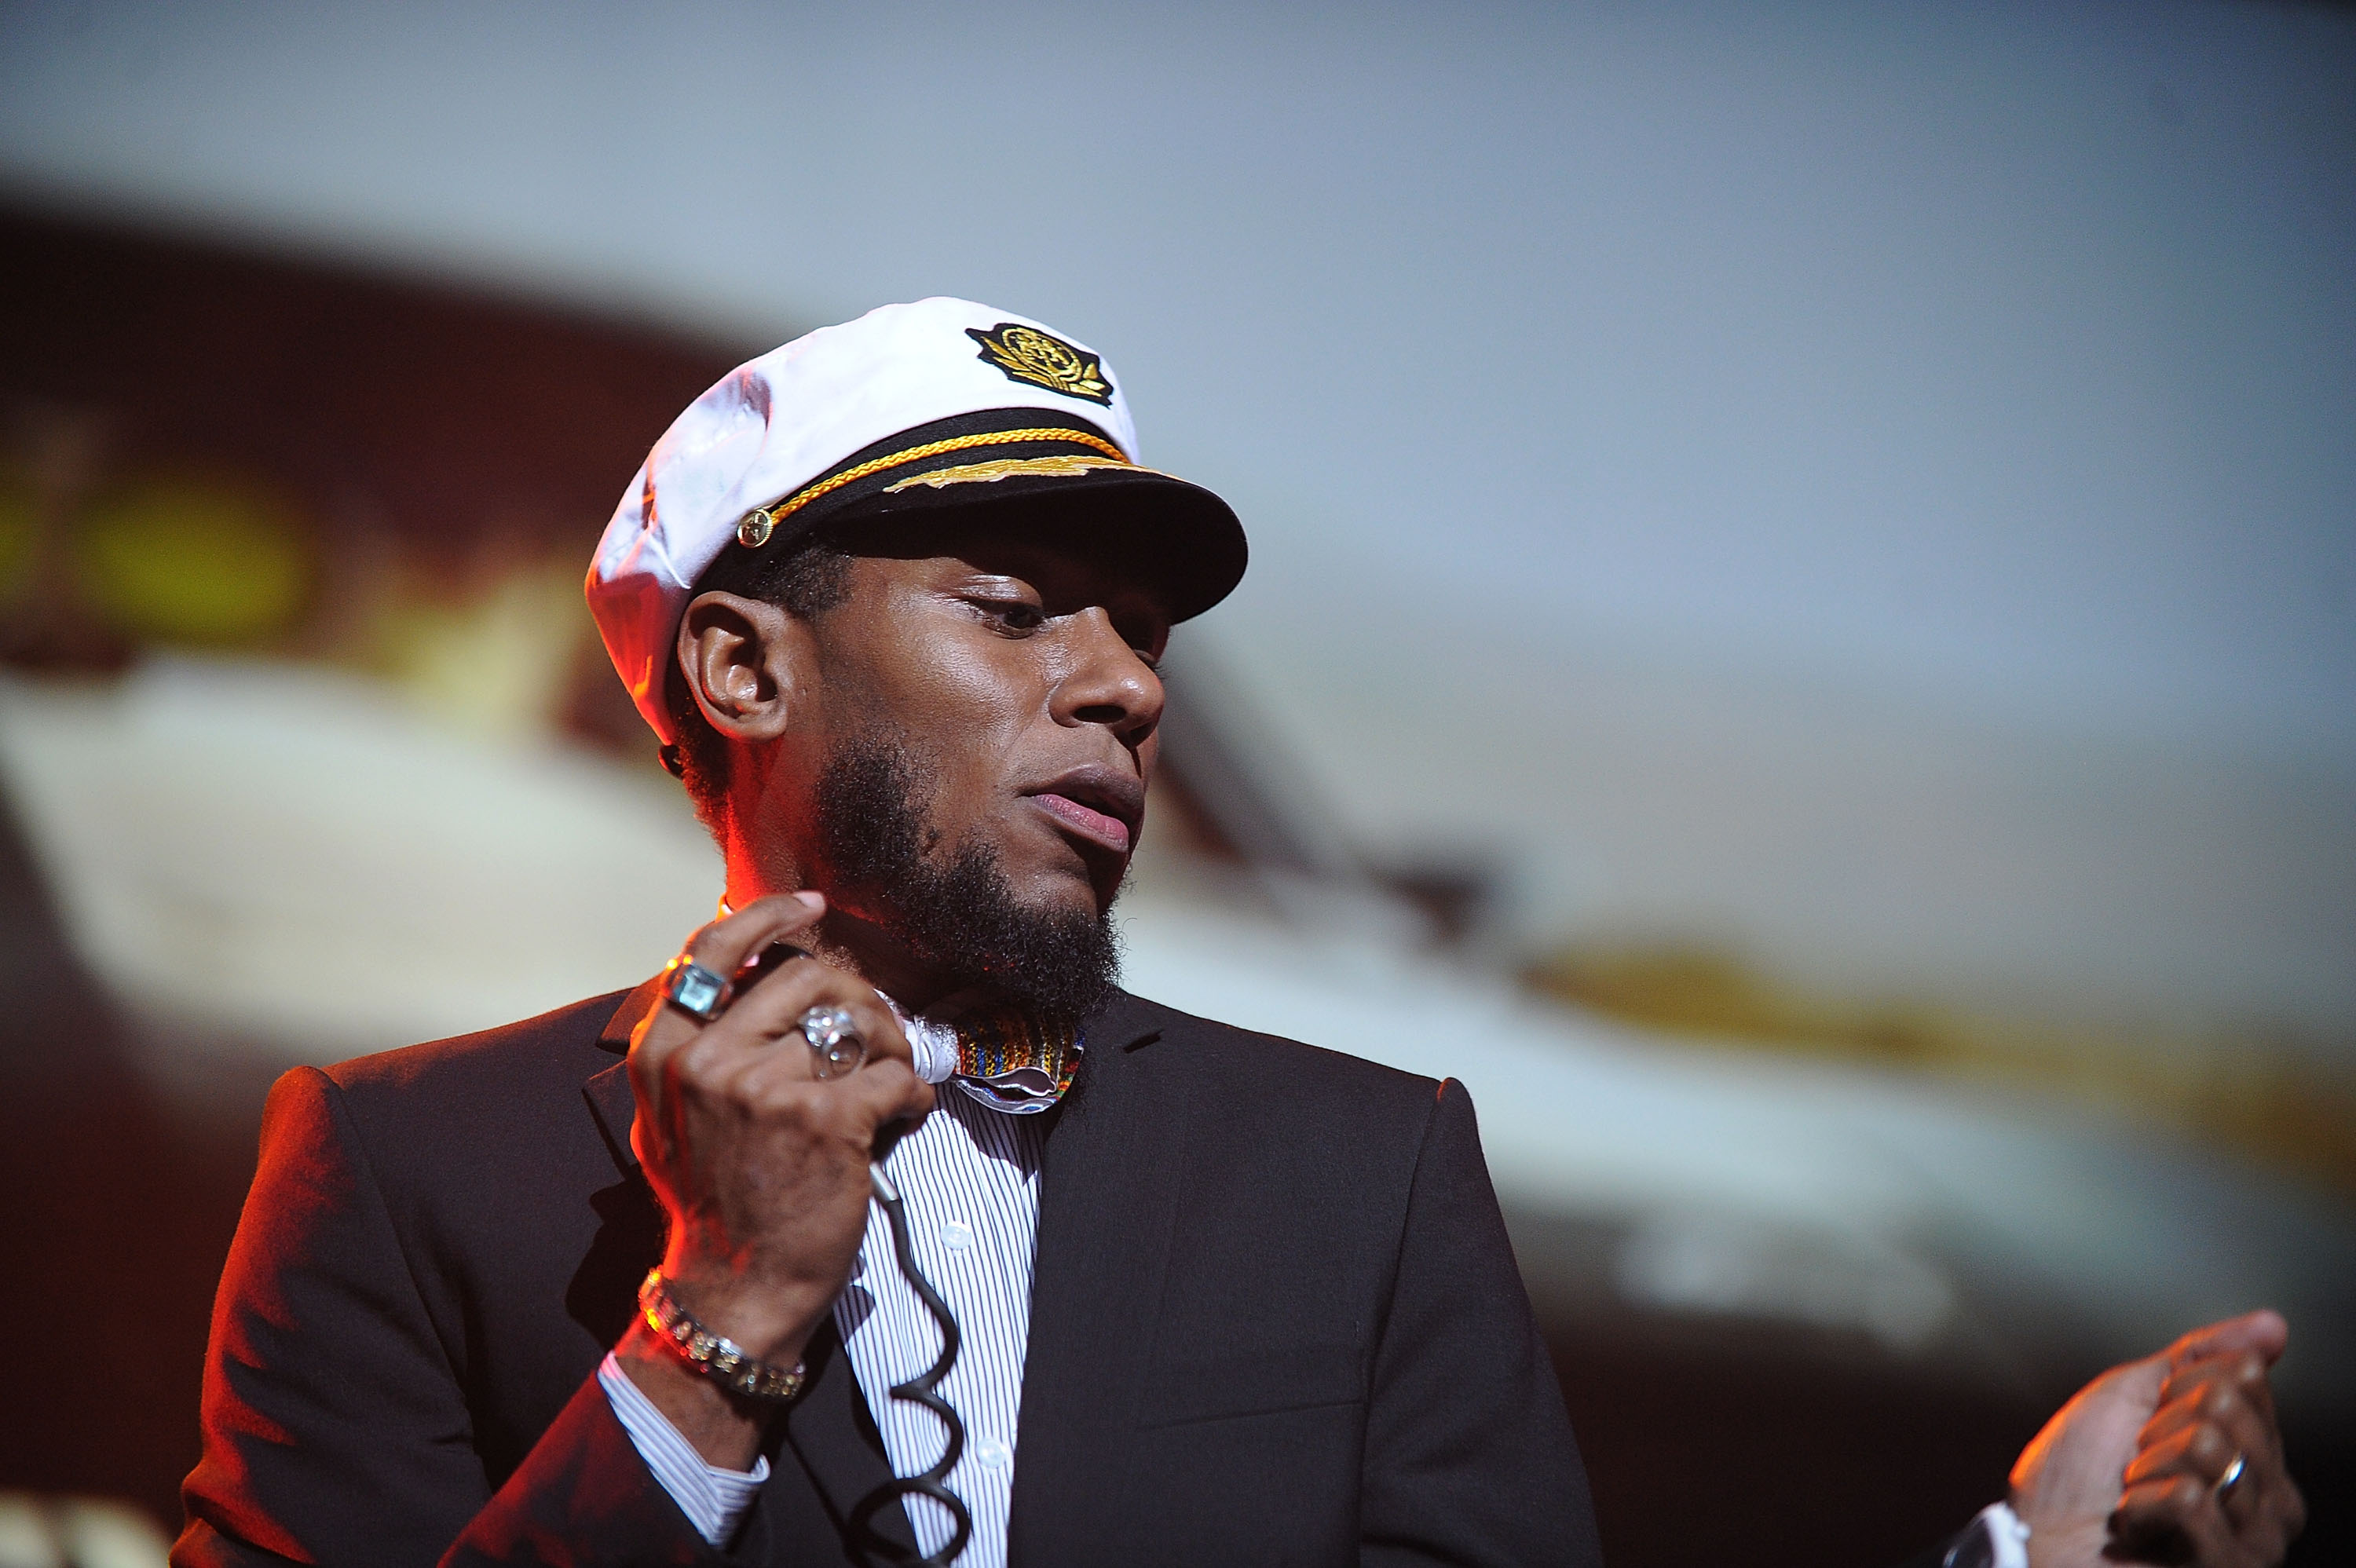 Yasiin Bey Will Play Thelonious Monk in a New Biopic